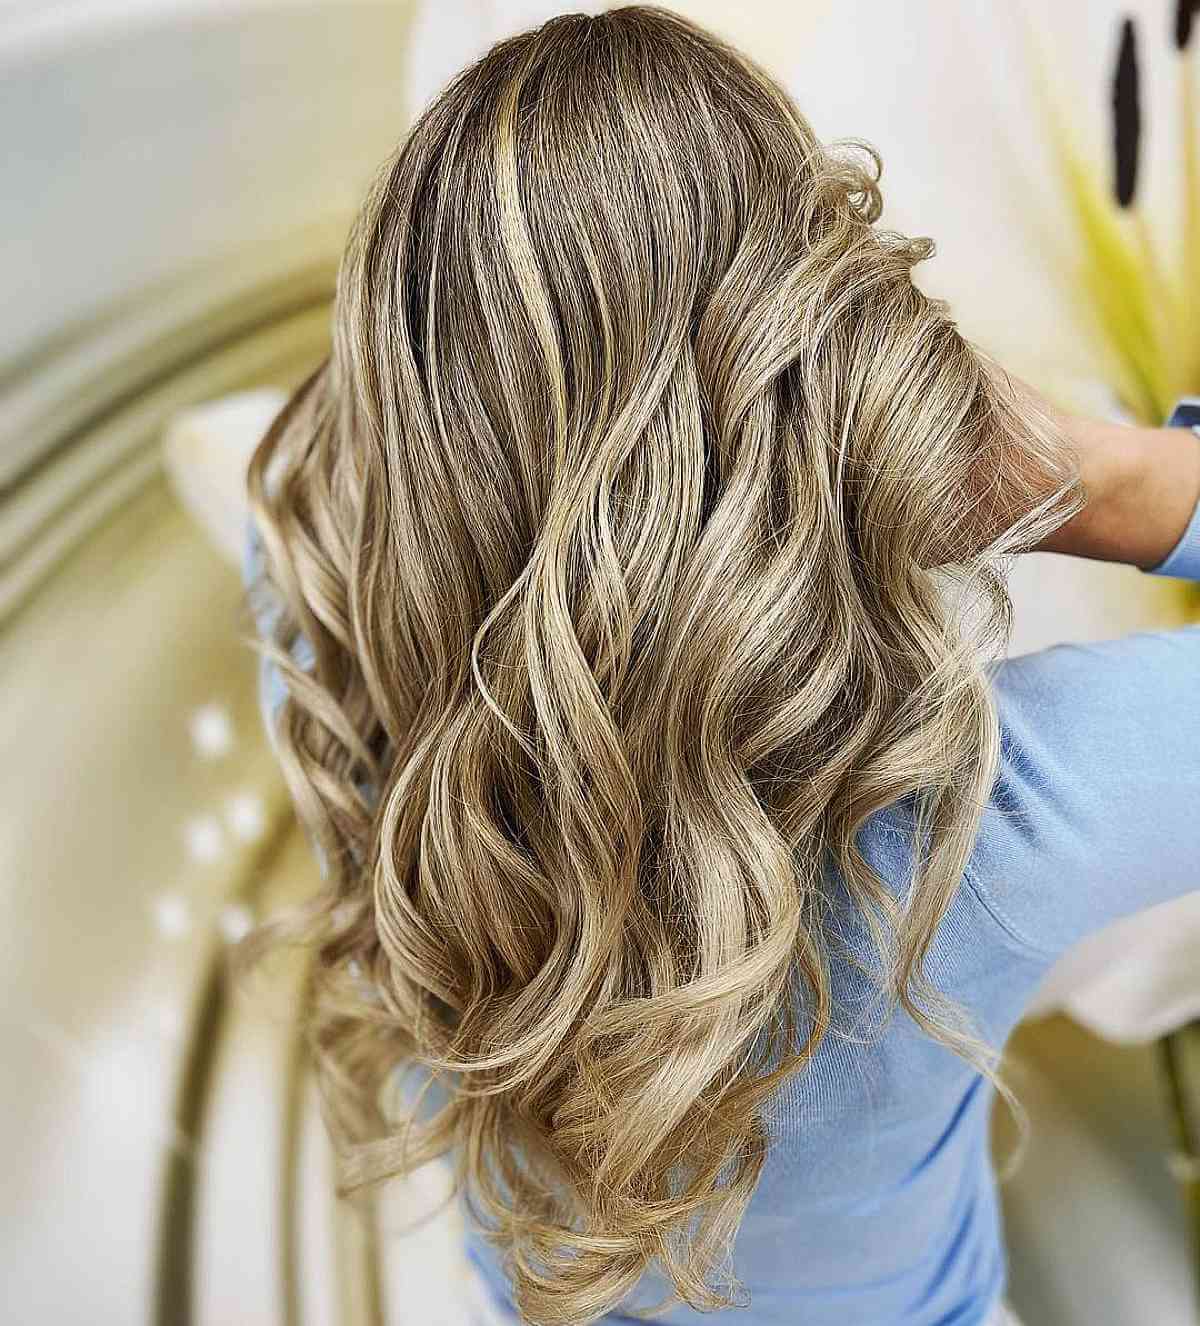 What Are Lowlights? Is it Right for Your Hair? - Hairstyles Weekly